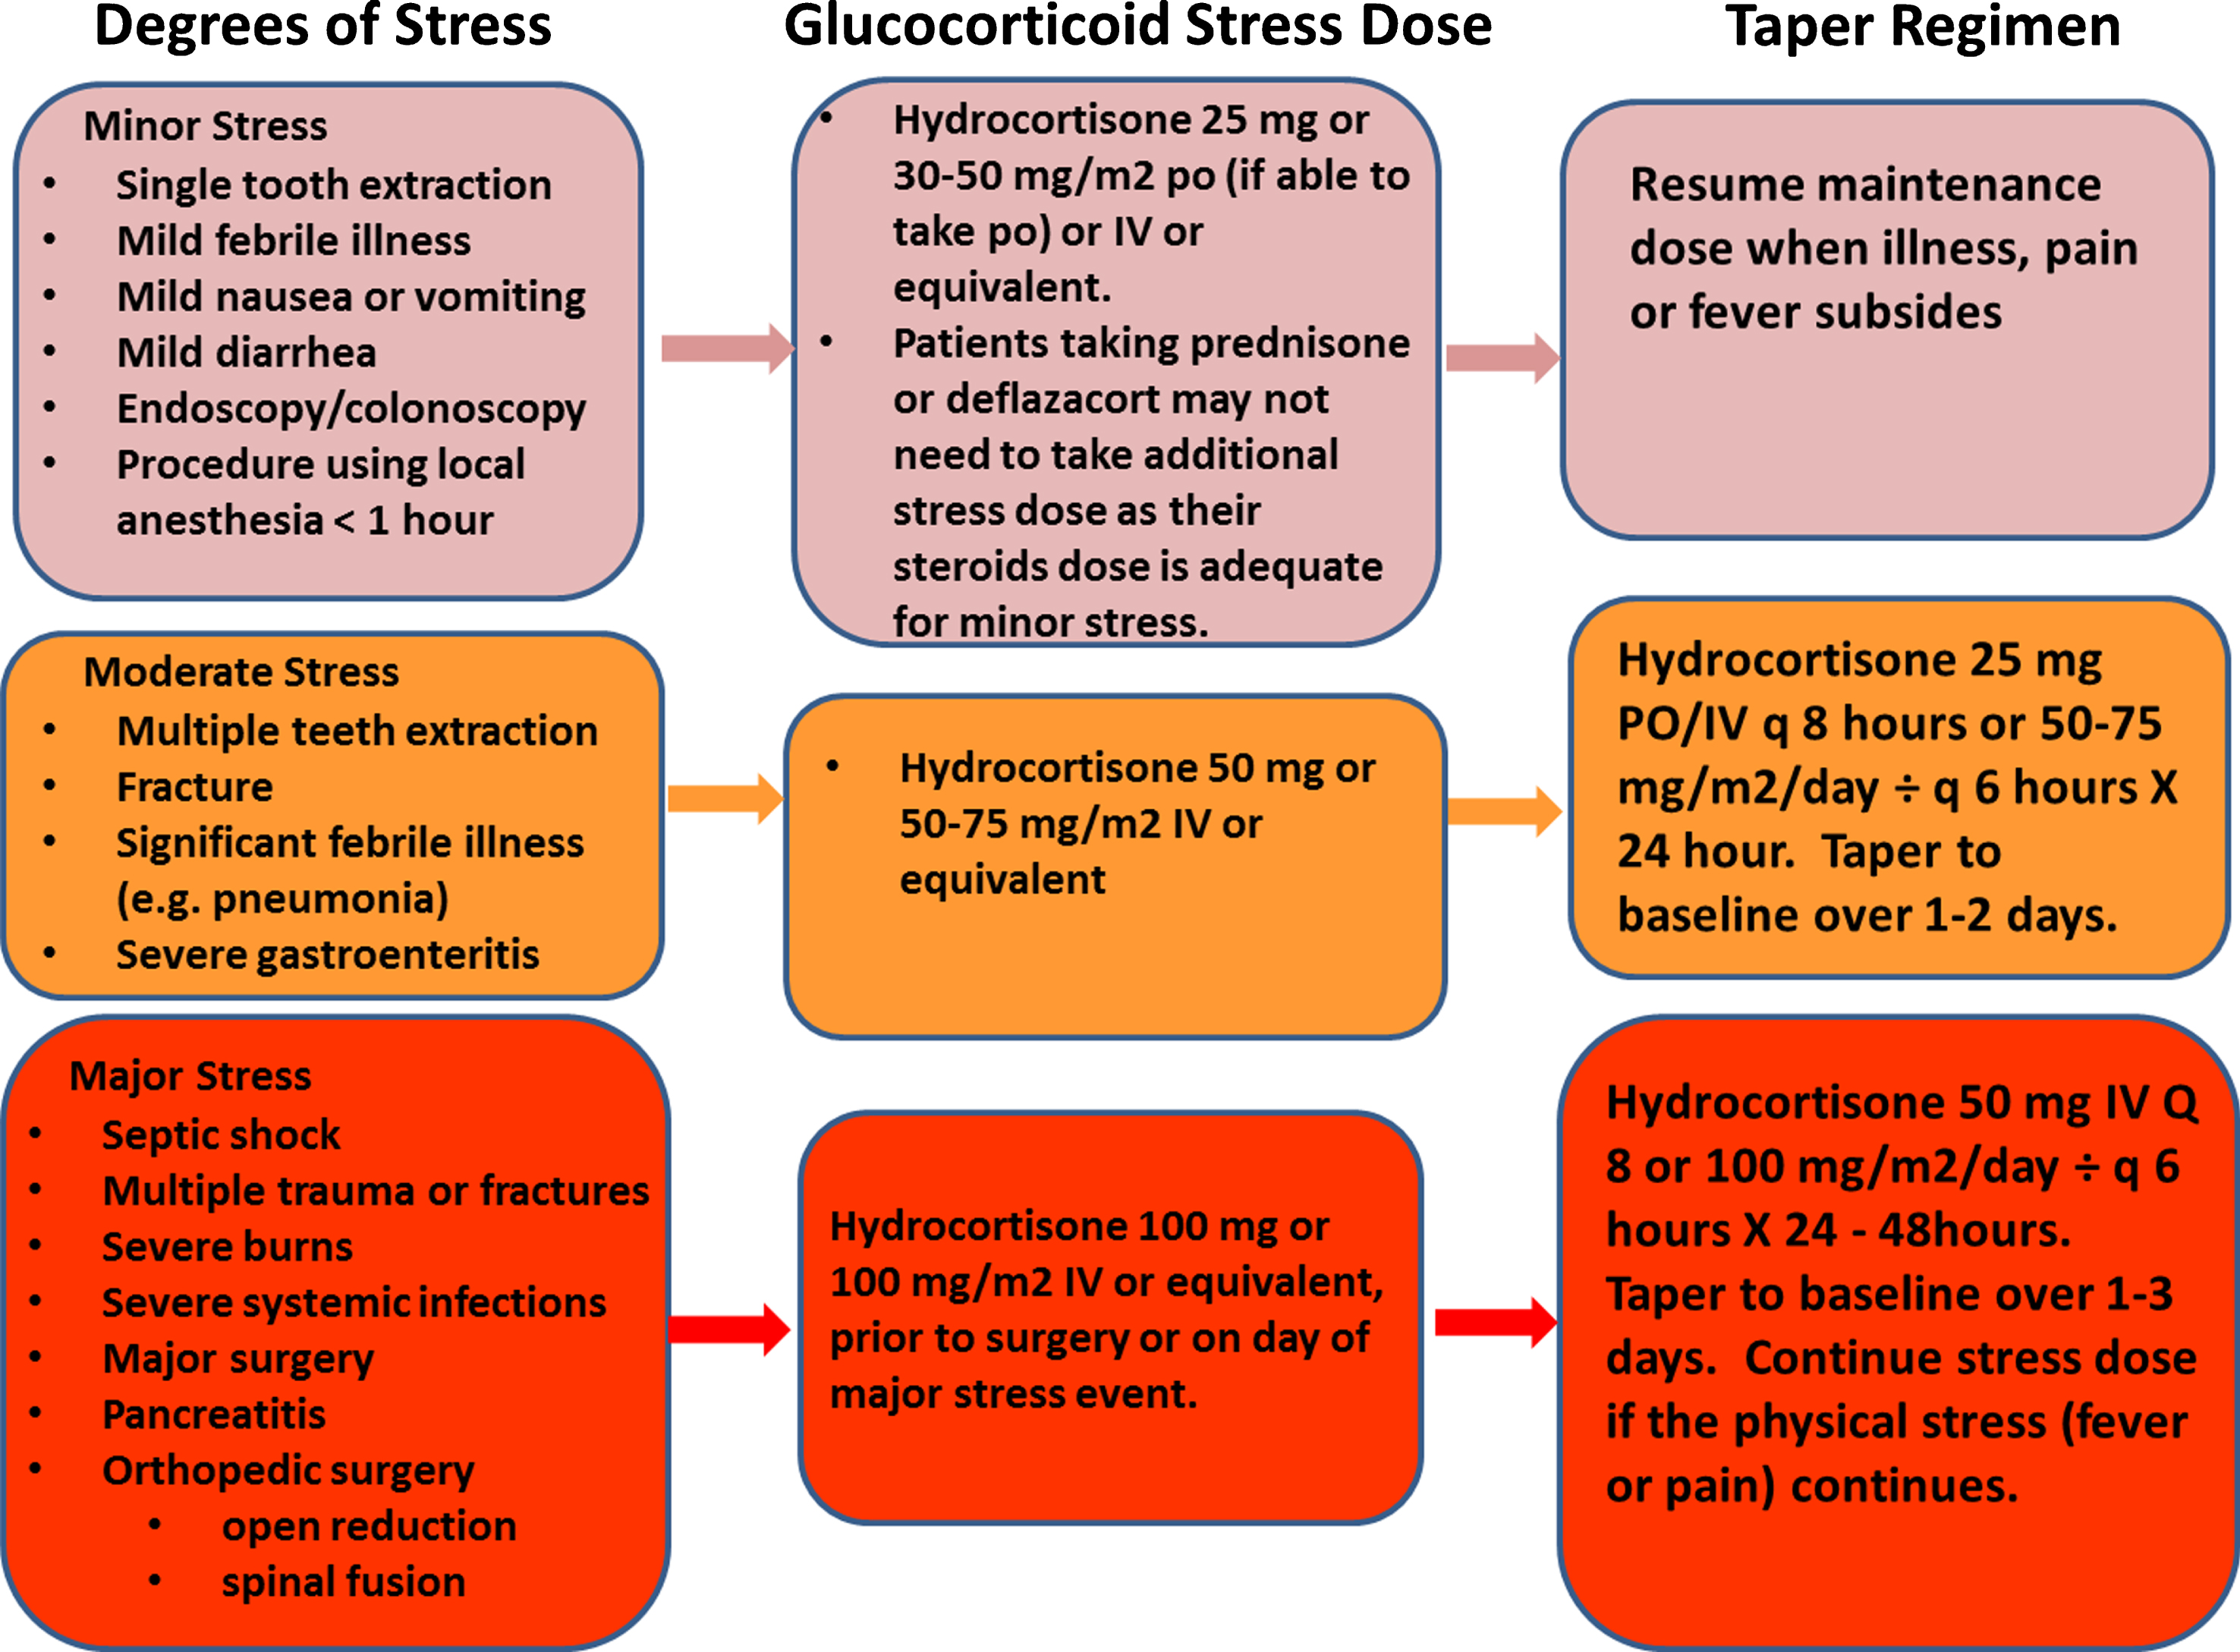 Recommendations for steroids stress dose coverage for different degrees of stress [45].